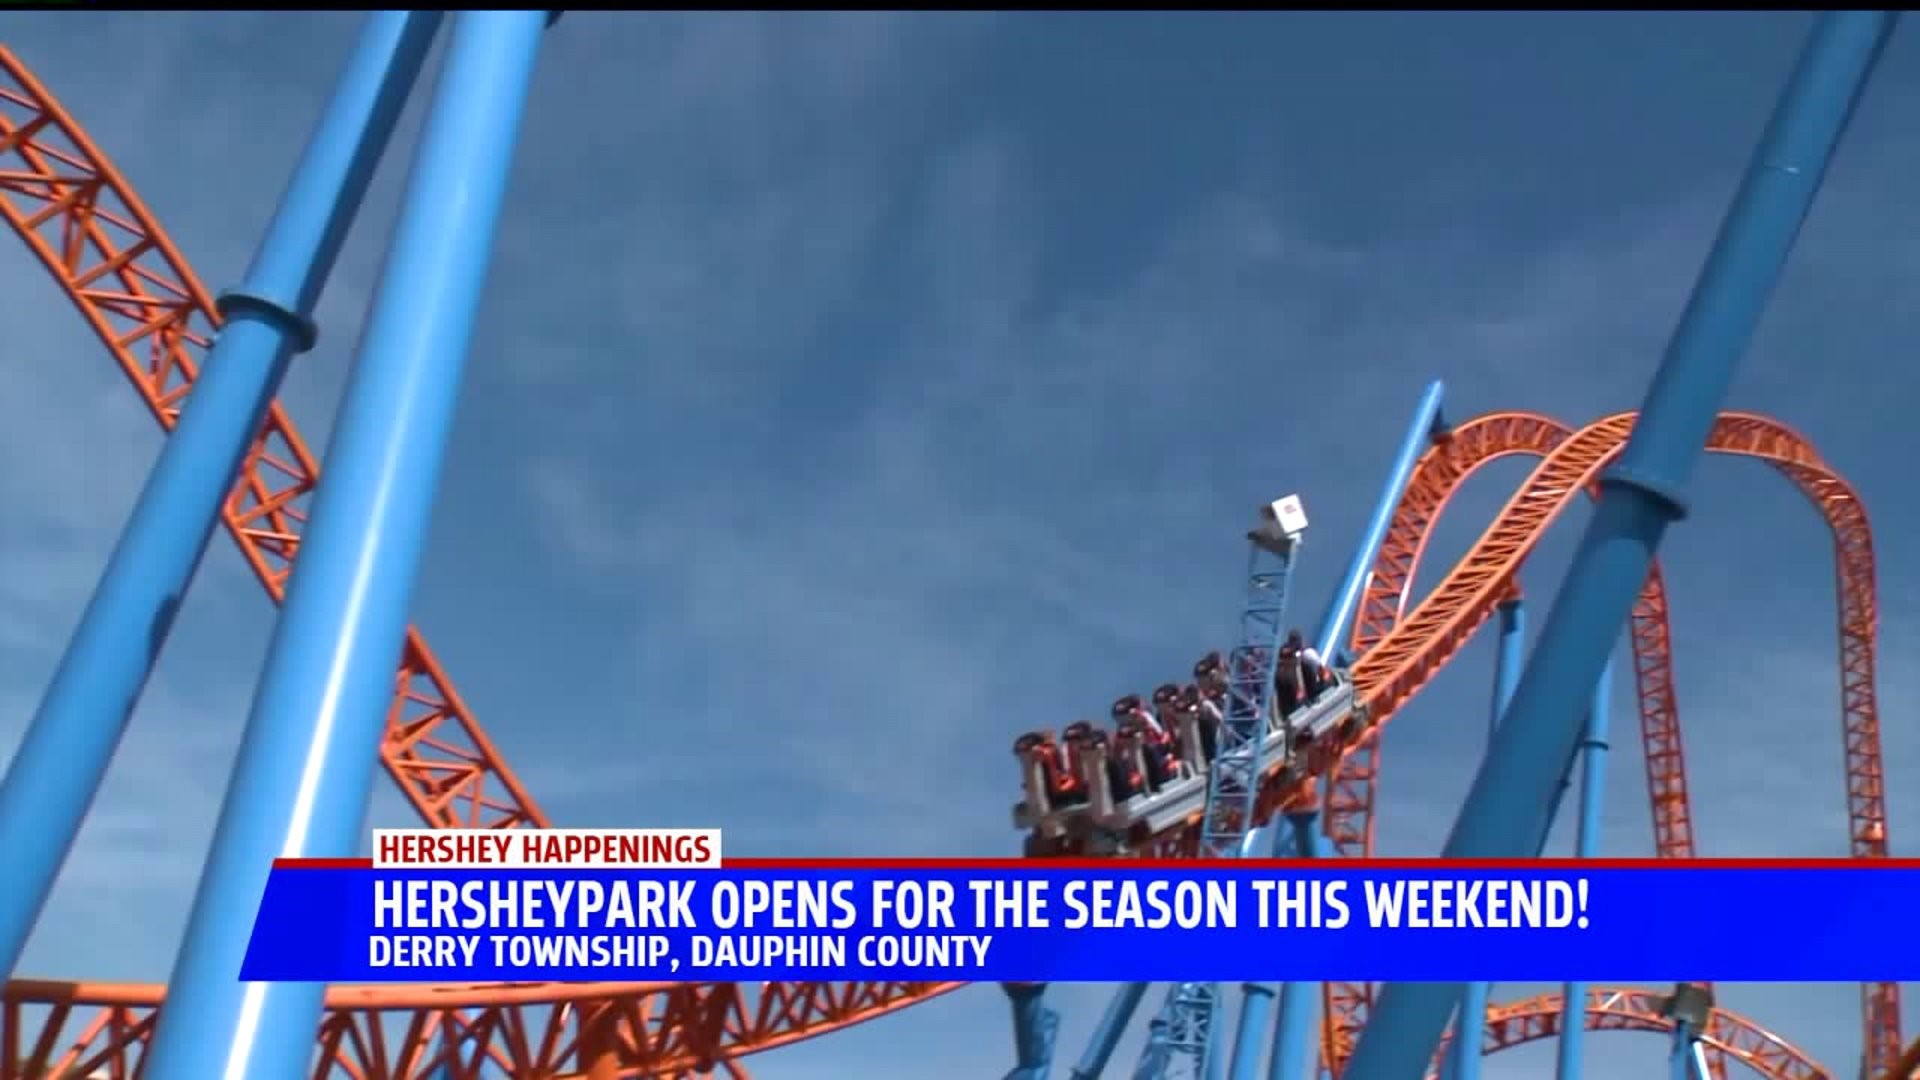 Hersheypark Opens for the Season this Weekend